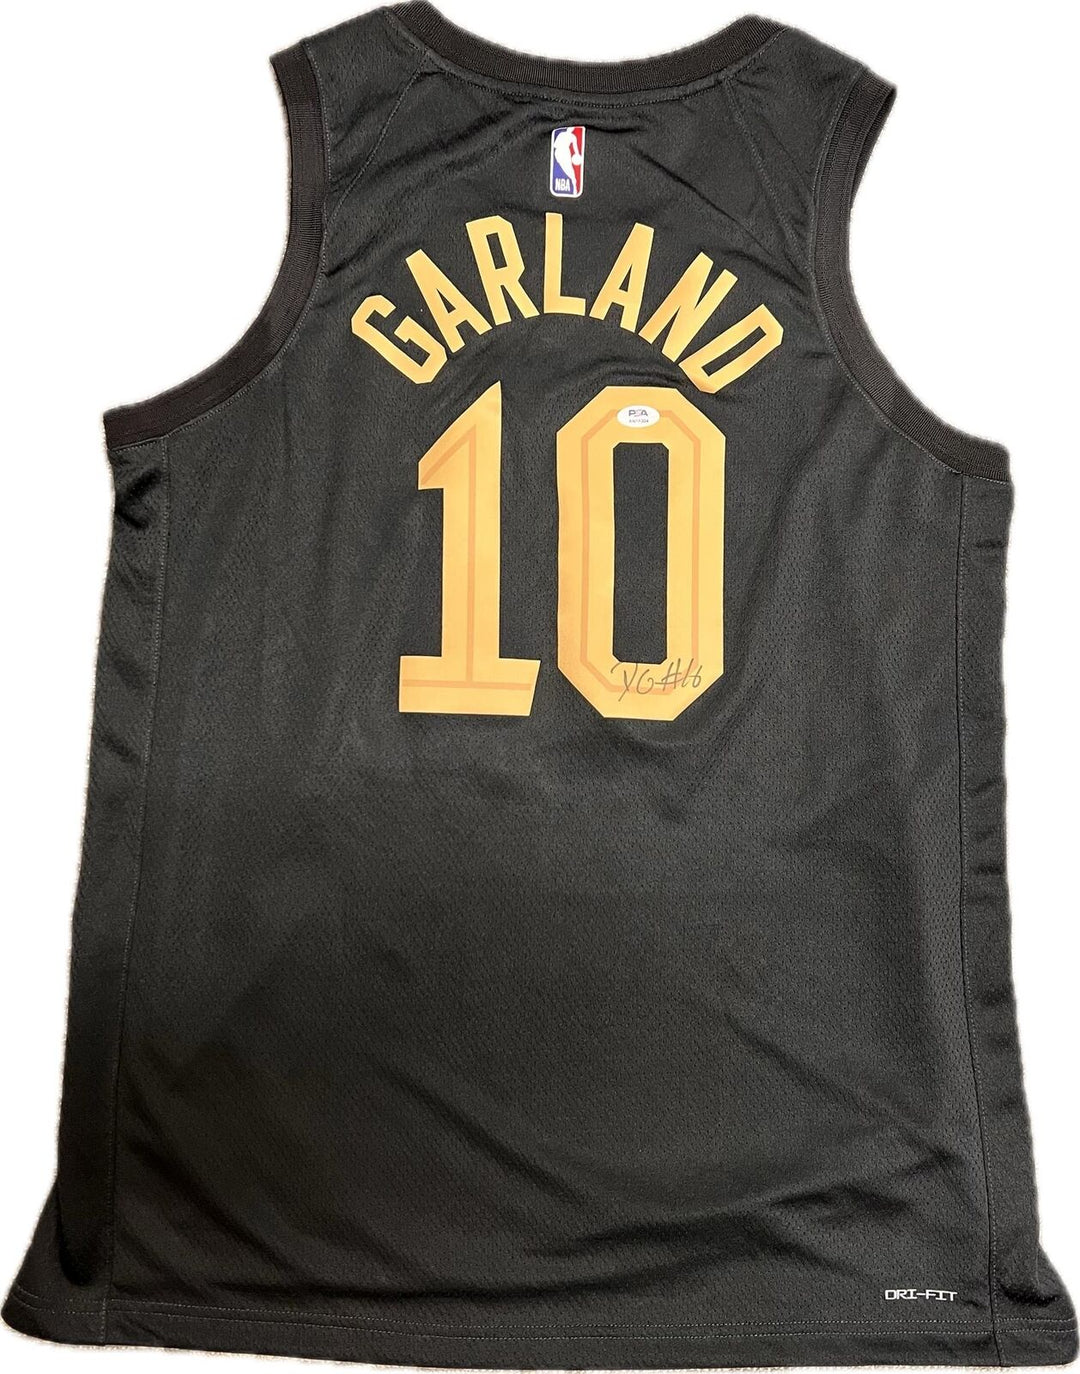 Darius Garland signed jersey PSA/DNA Cleveland Cavaliers Autographed Image 1